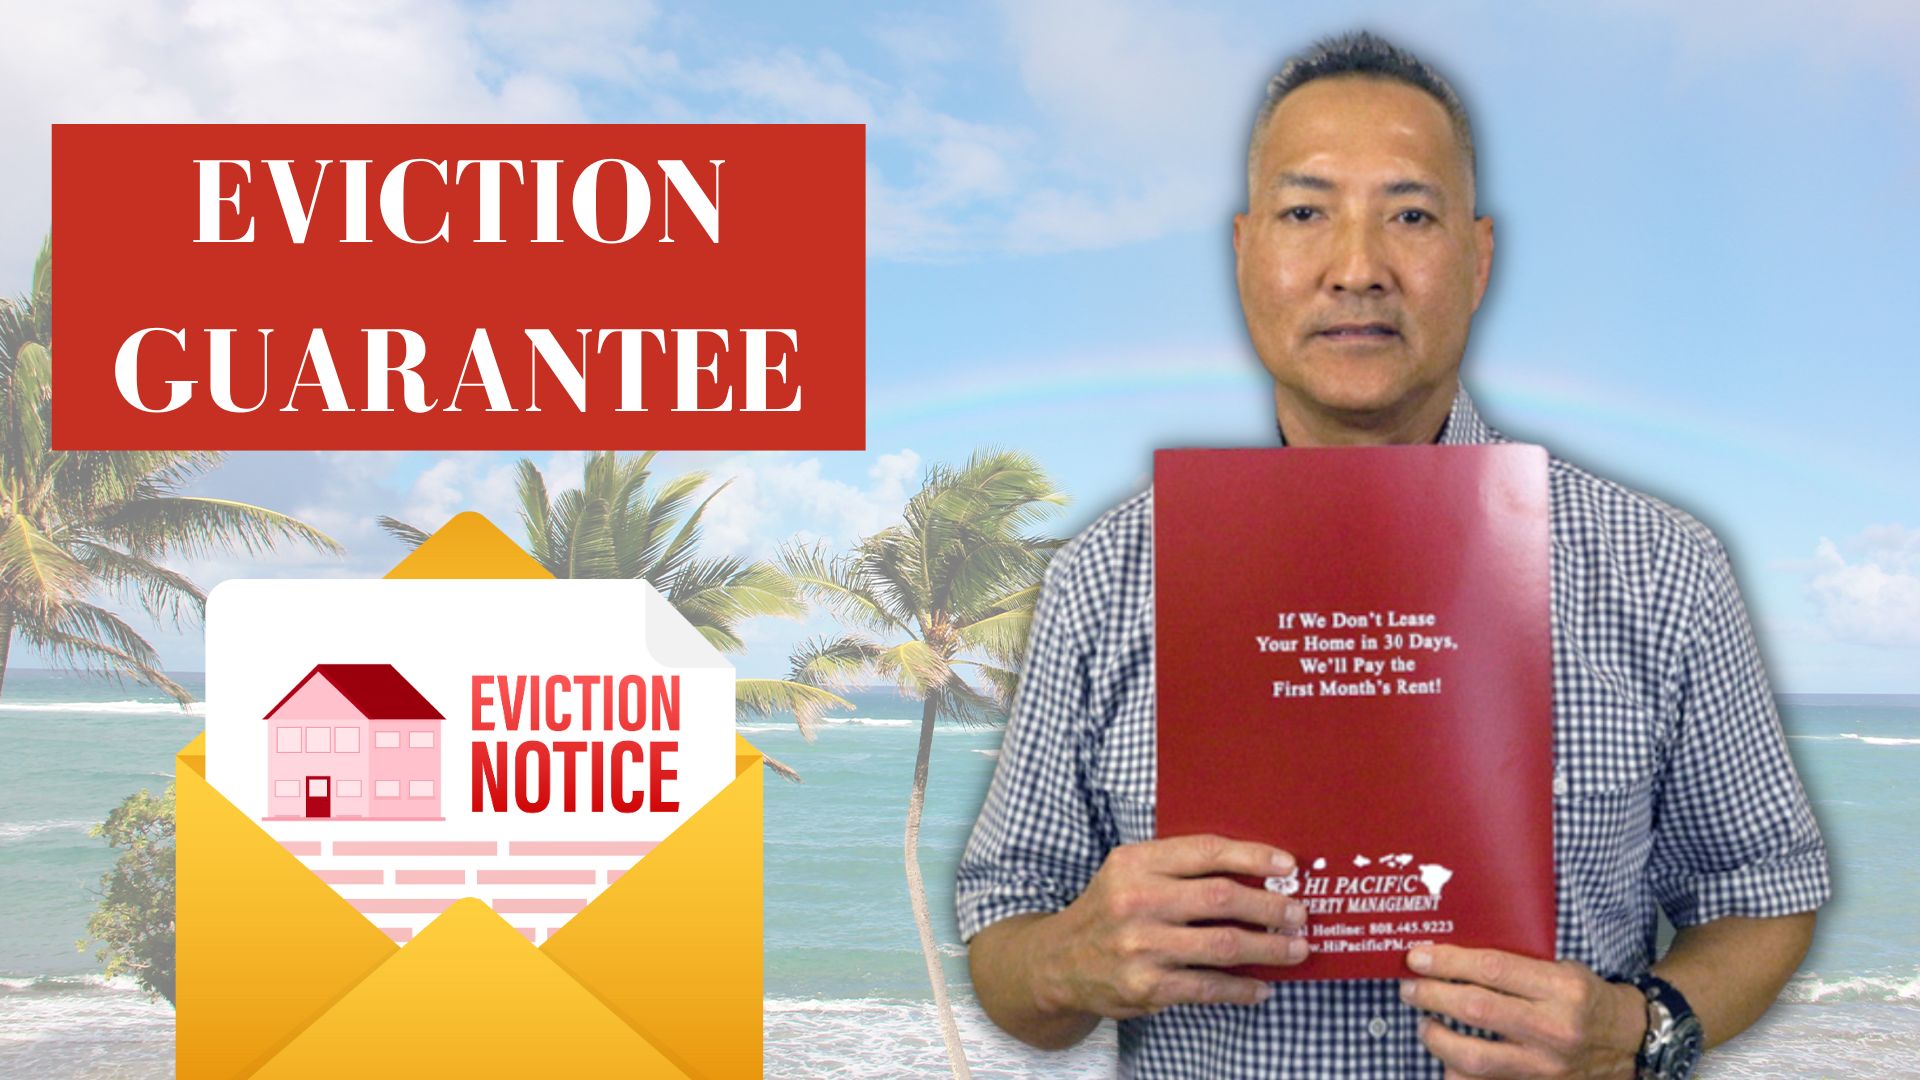 Say Goodbye to Legal Hassles with Our Eviction Guarantee